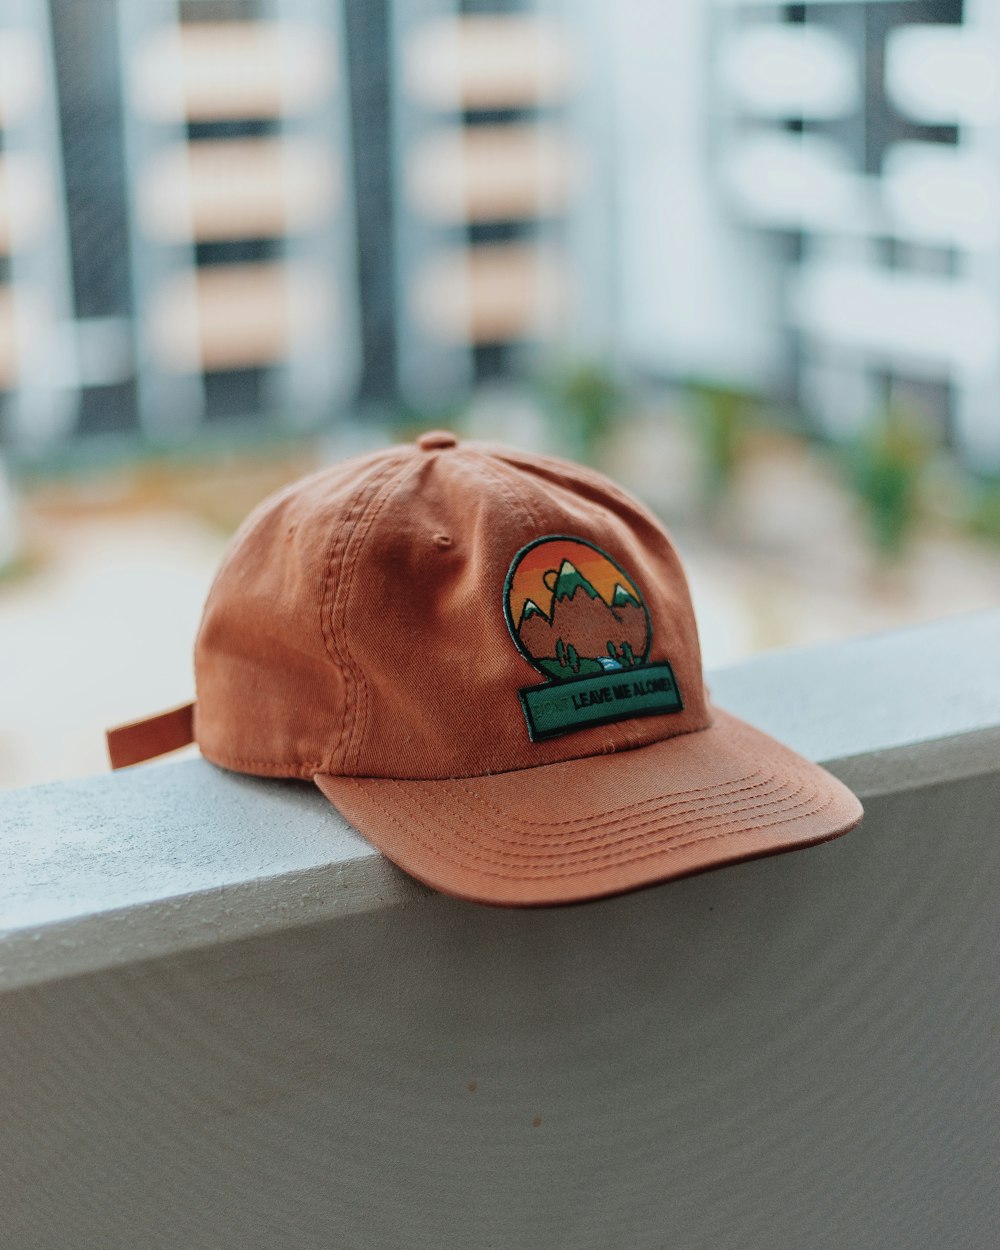 orange and green mountain embroidered cap on pavement